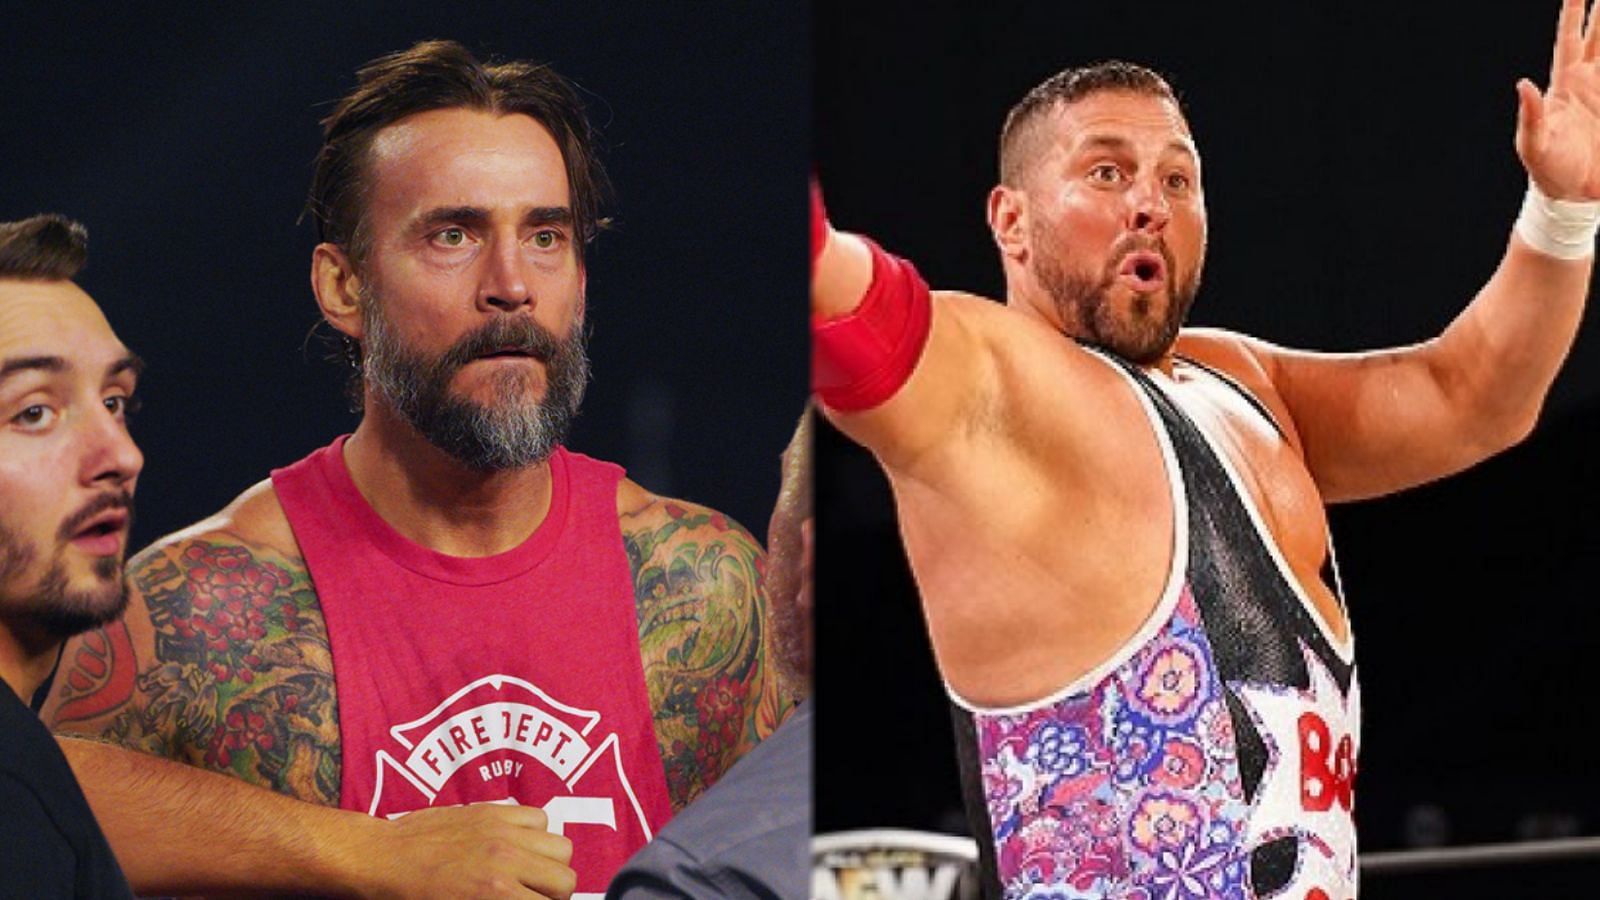 CM Punk and Colt Cabana have a lot of history and bad blood.